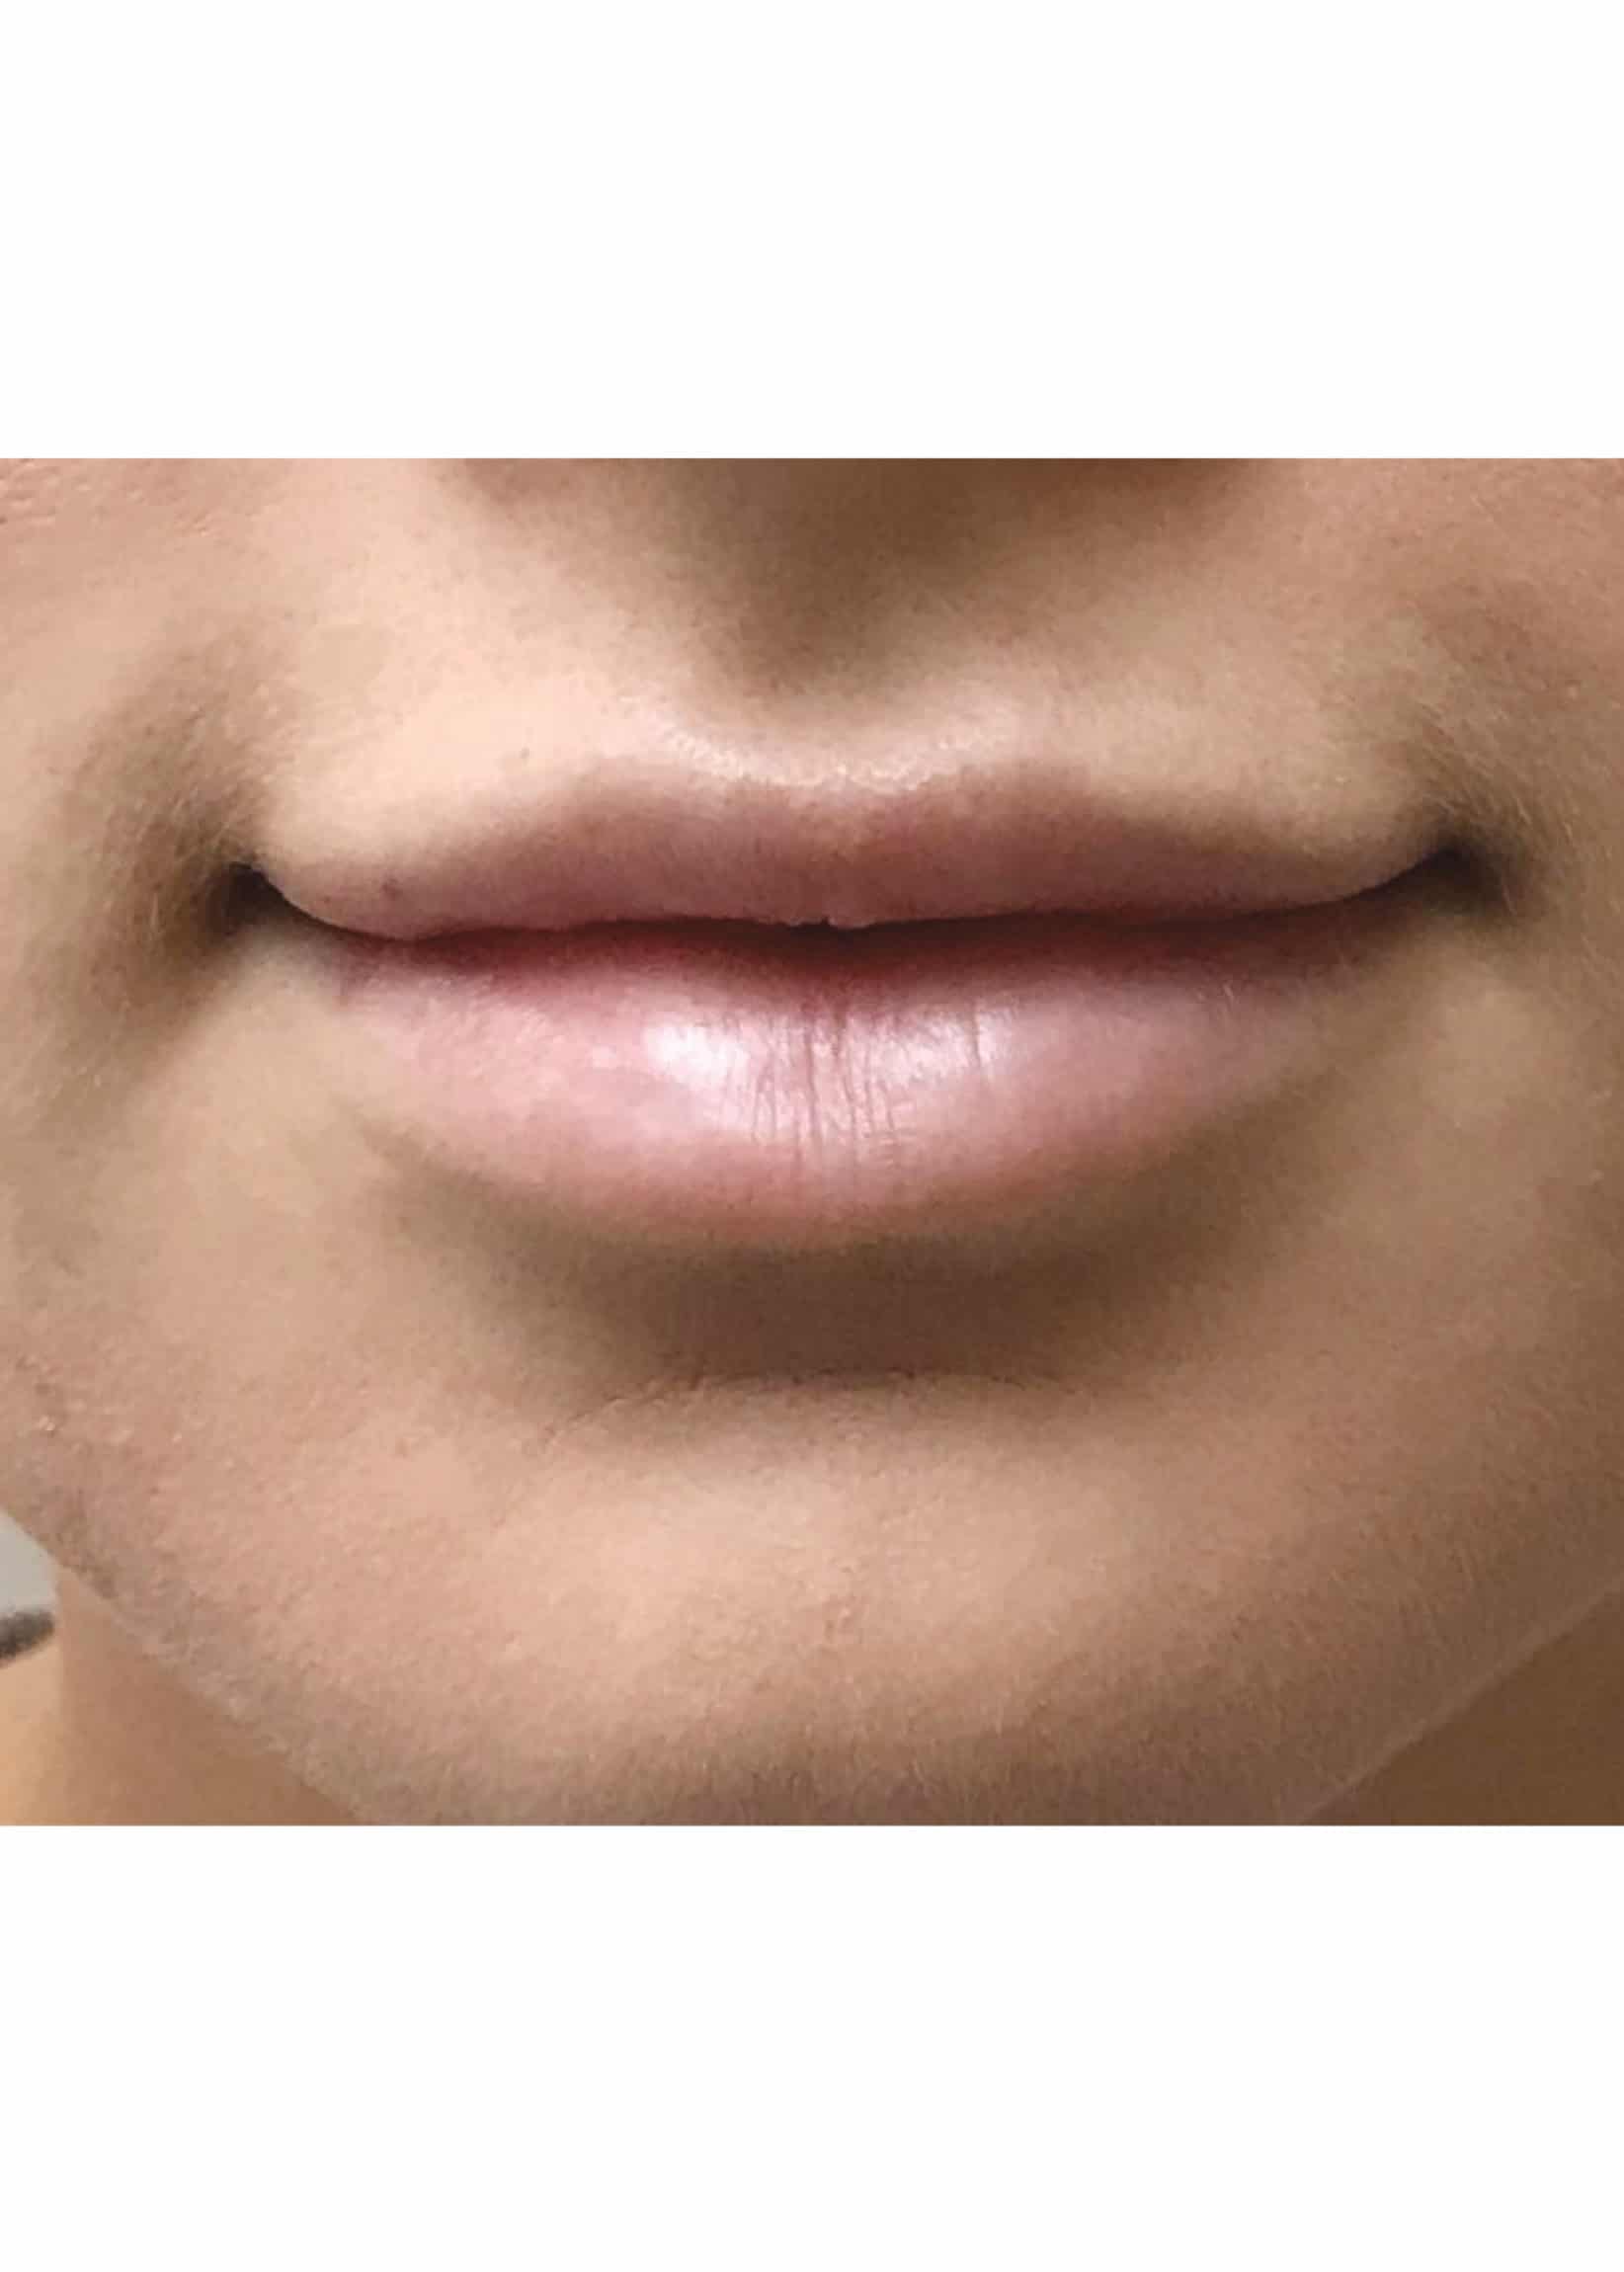 TheSkinCenter ProviderPages AngieKyne LipFiller After 1 scaled 1